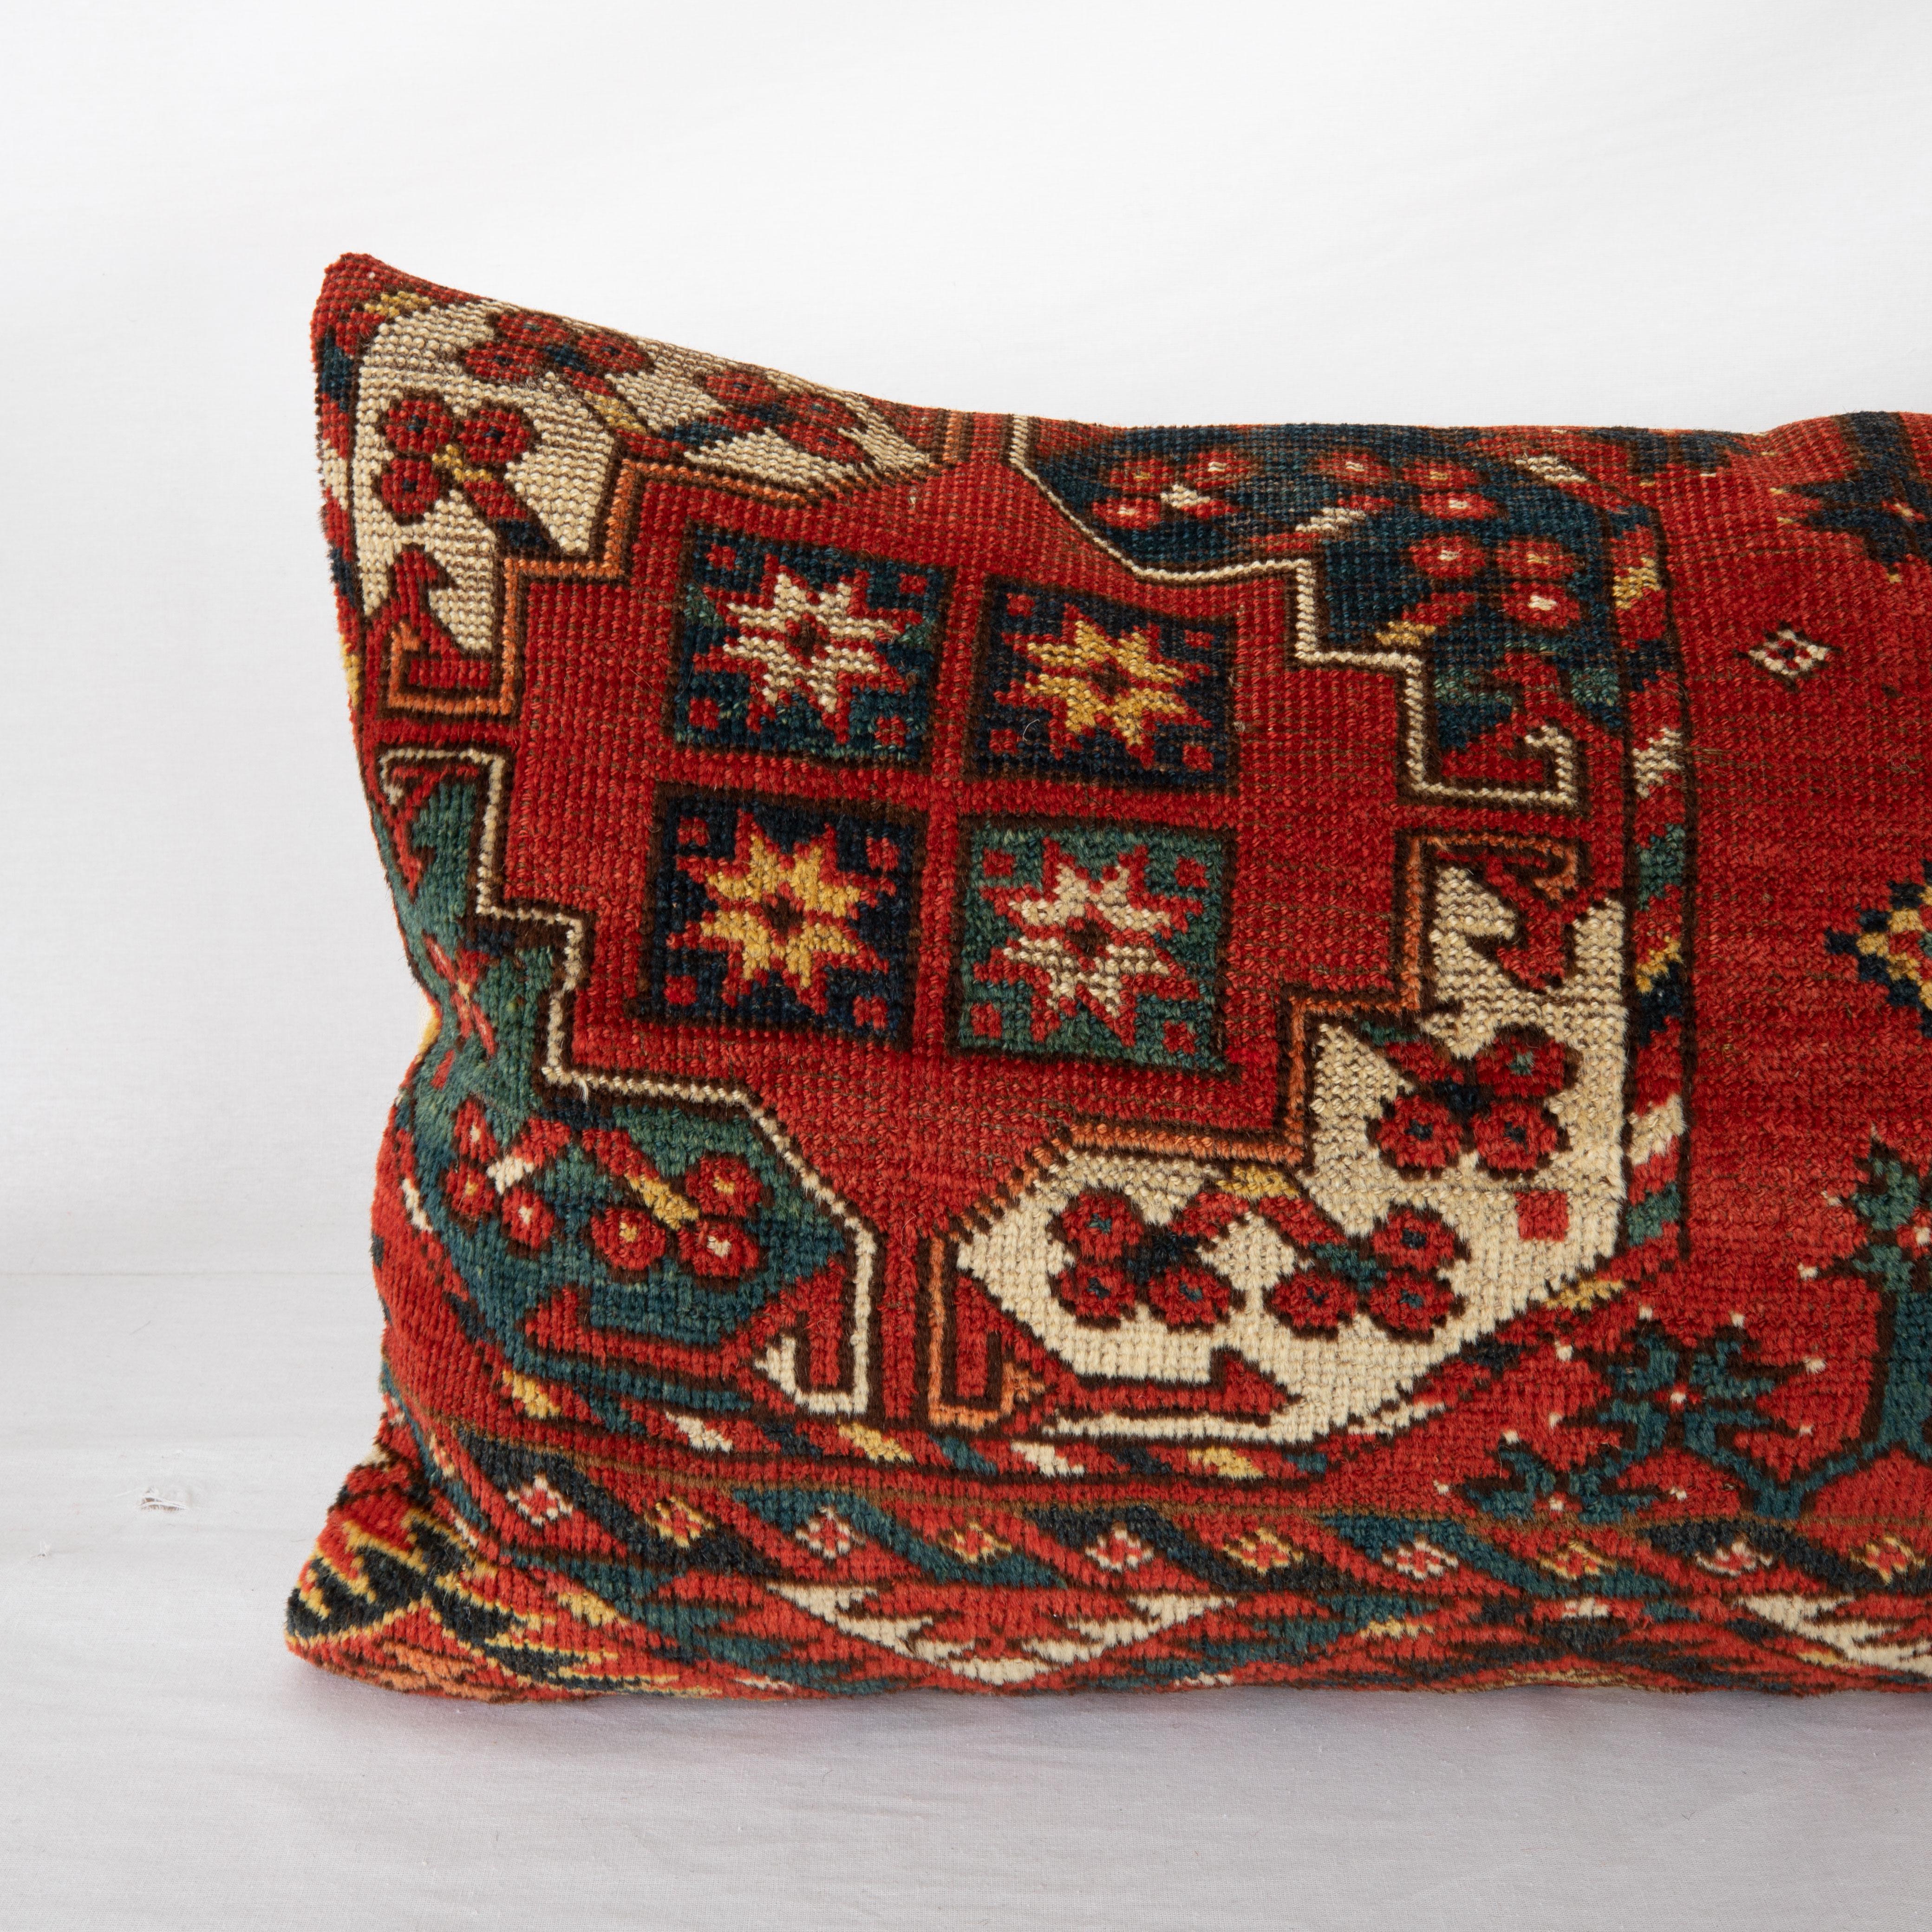 Tribal Antique Rug Pillowcase Made from Mid-19th C. Turkmen Ersari Rug Fragment For Sale